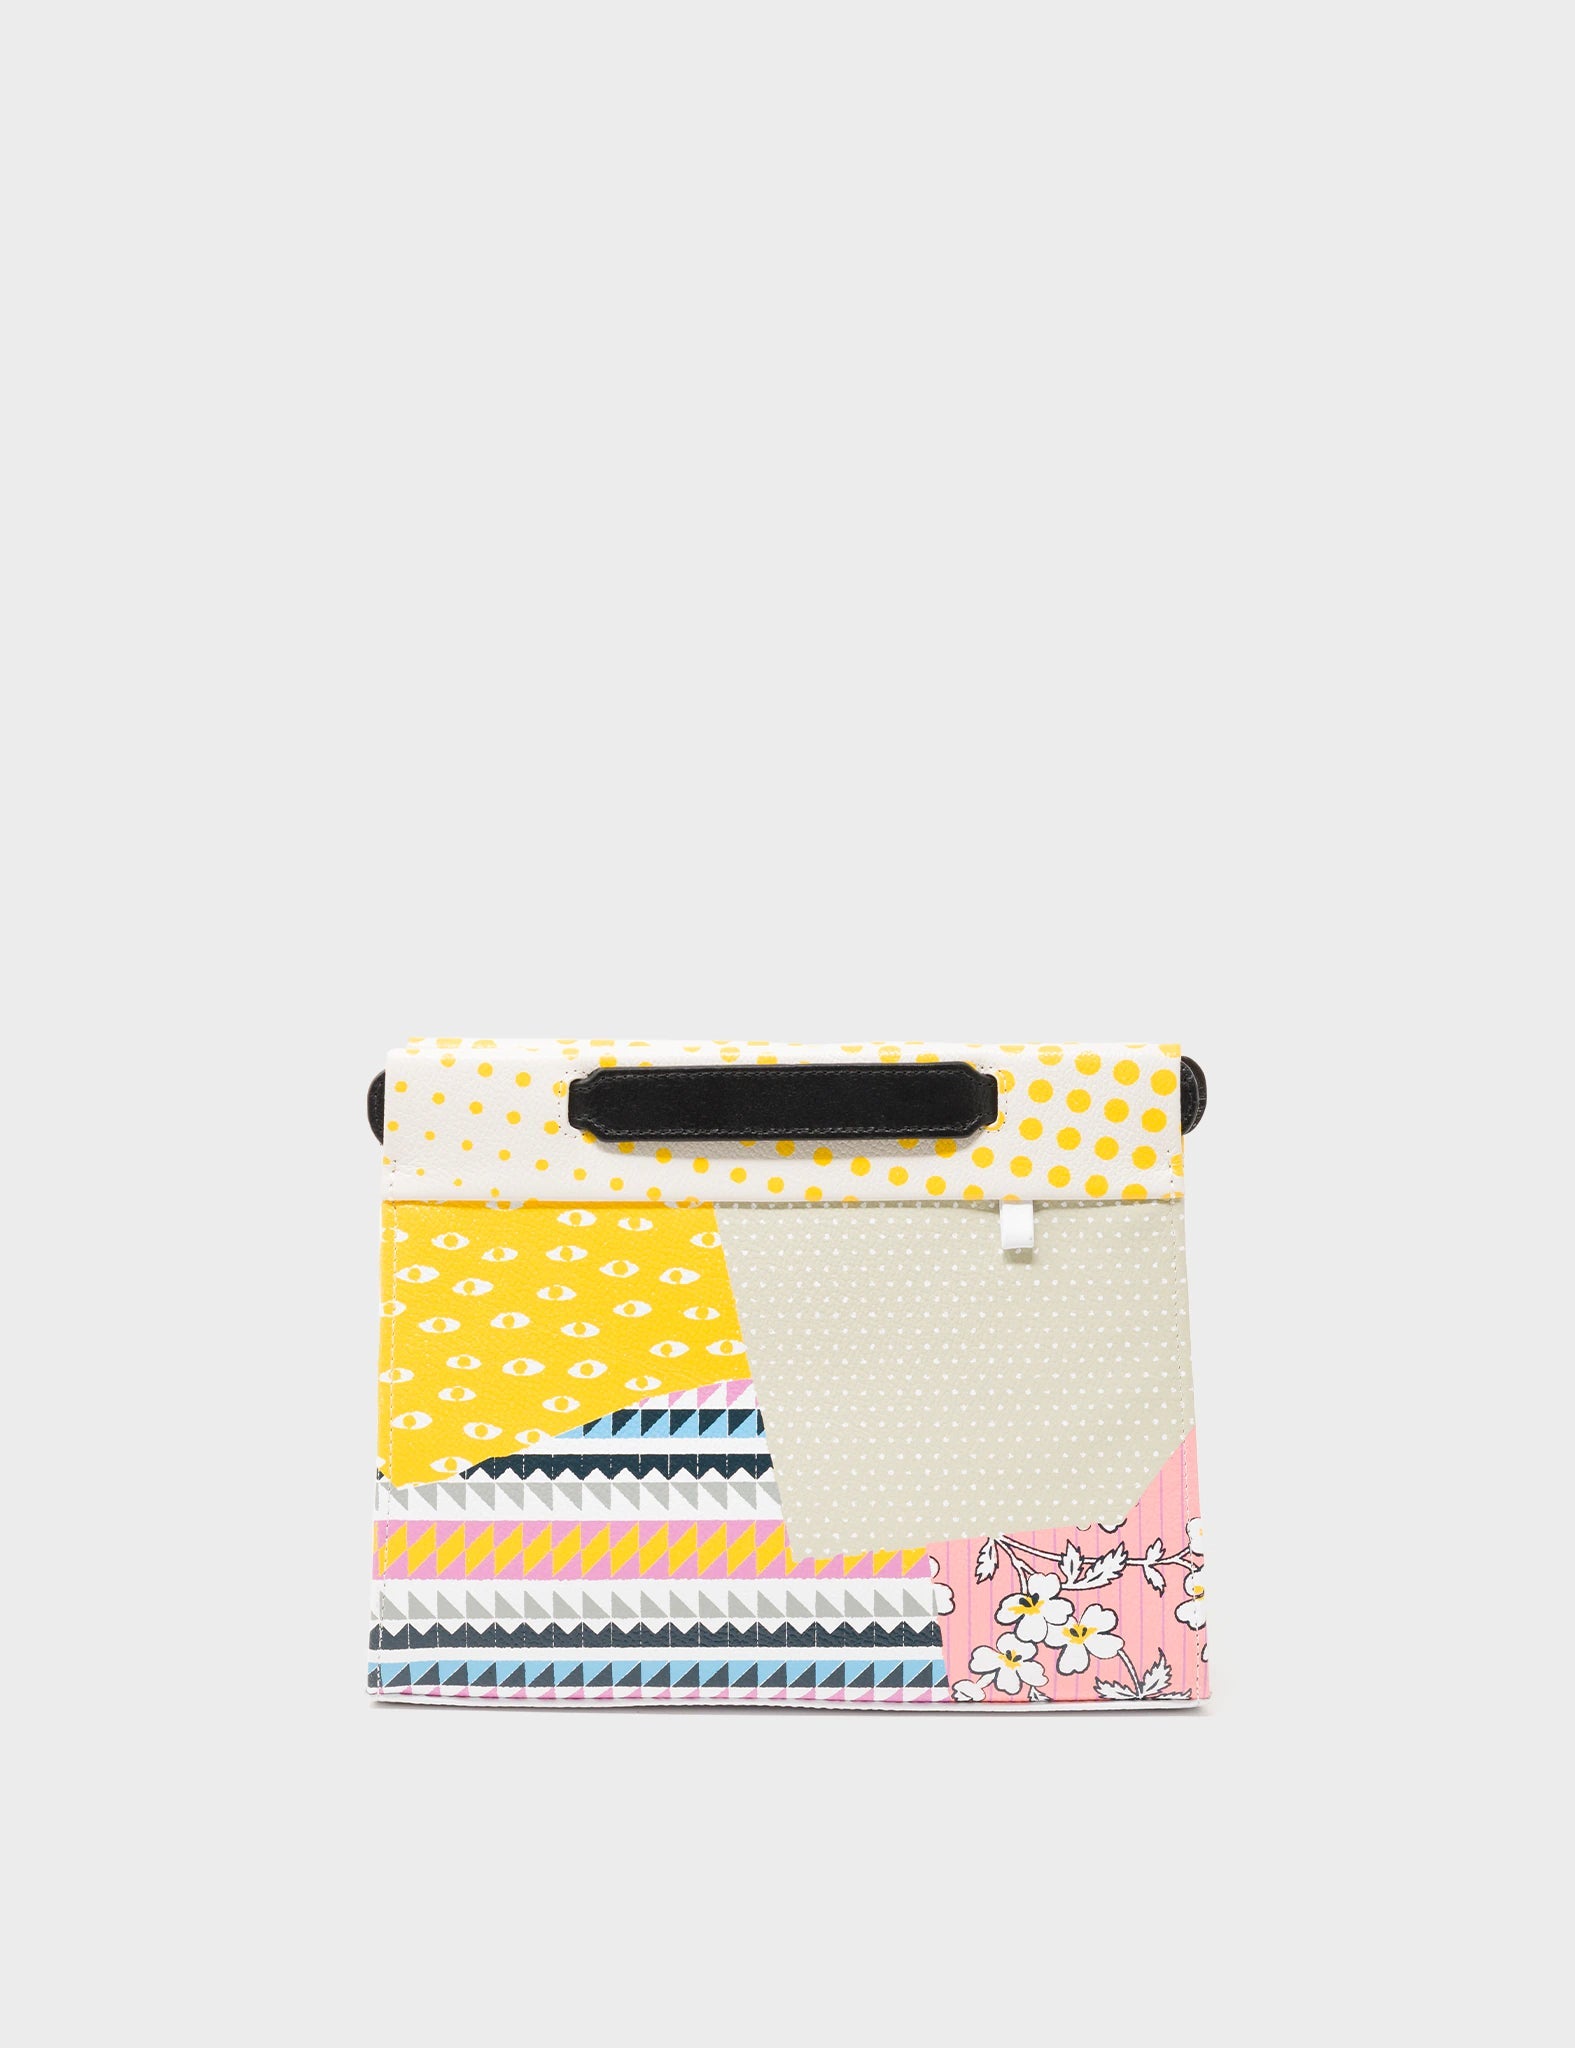 Vali Crossbody Small Cream Leather Bag - Collage print - Front